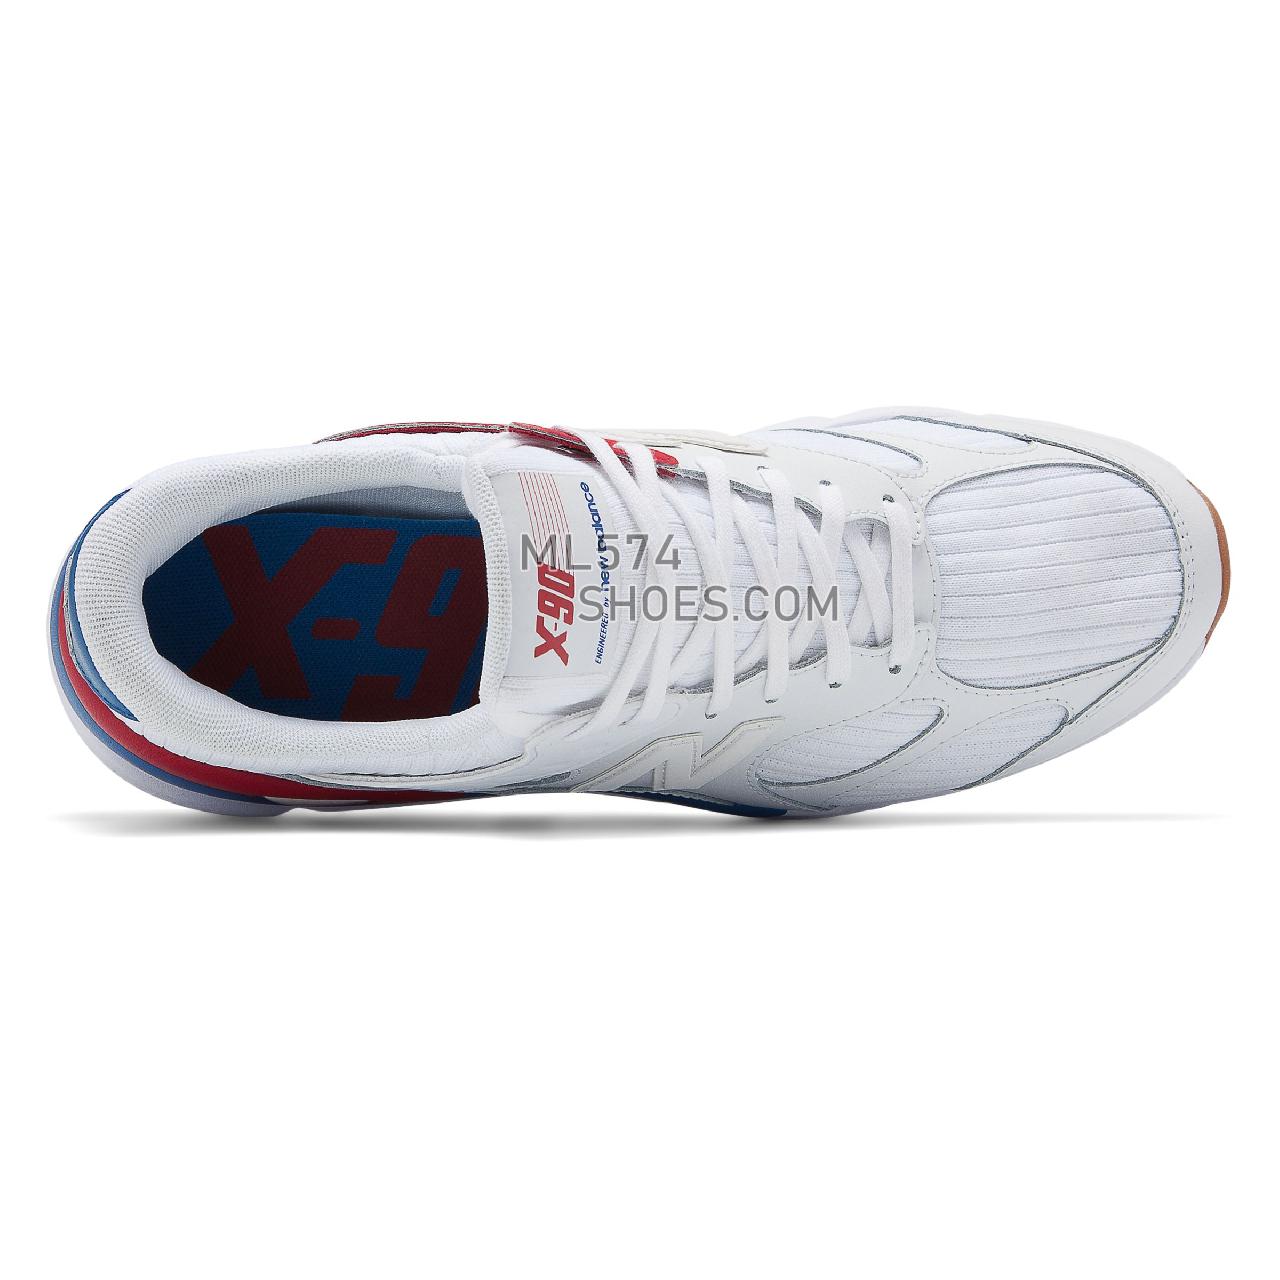 New Balance X-90 - Men's 90 - Classic Munsell White with Classic Blue and Chilli Pepper - MSX90RWB